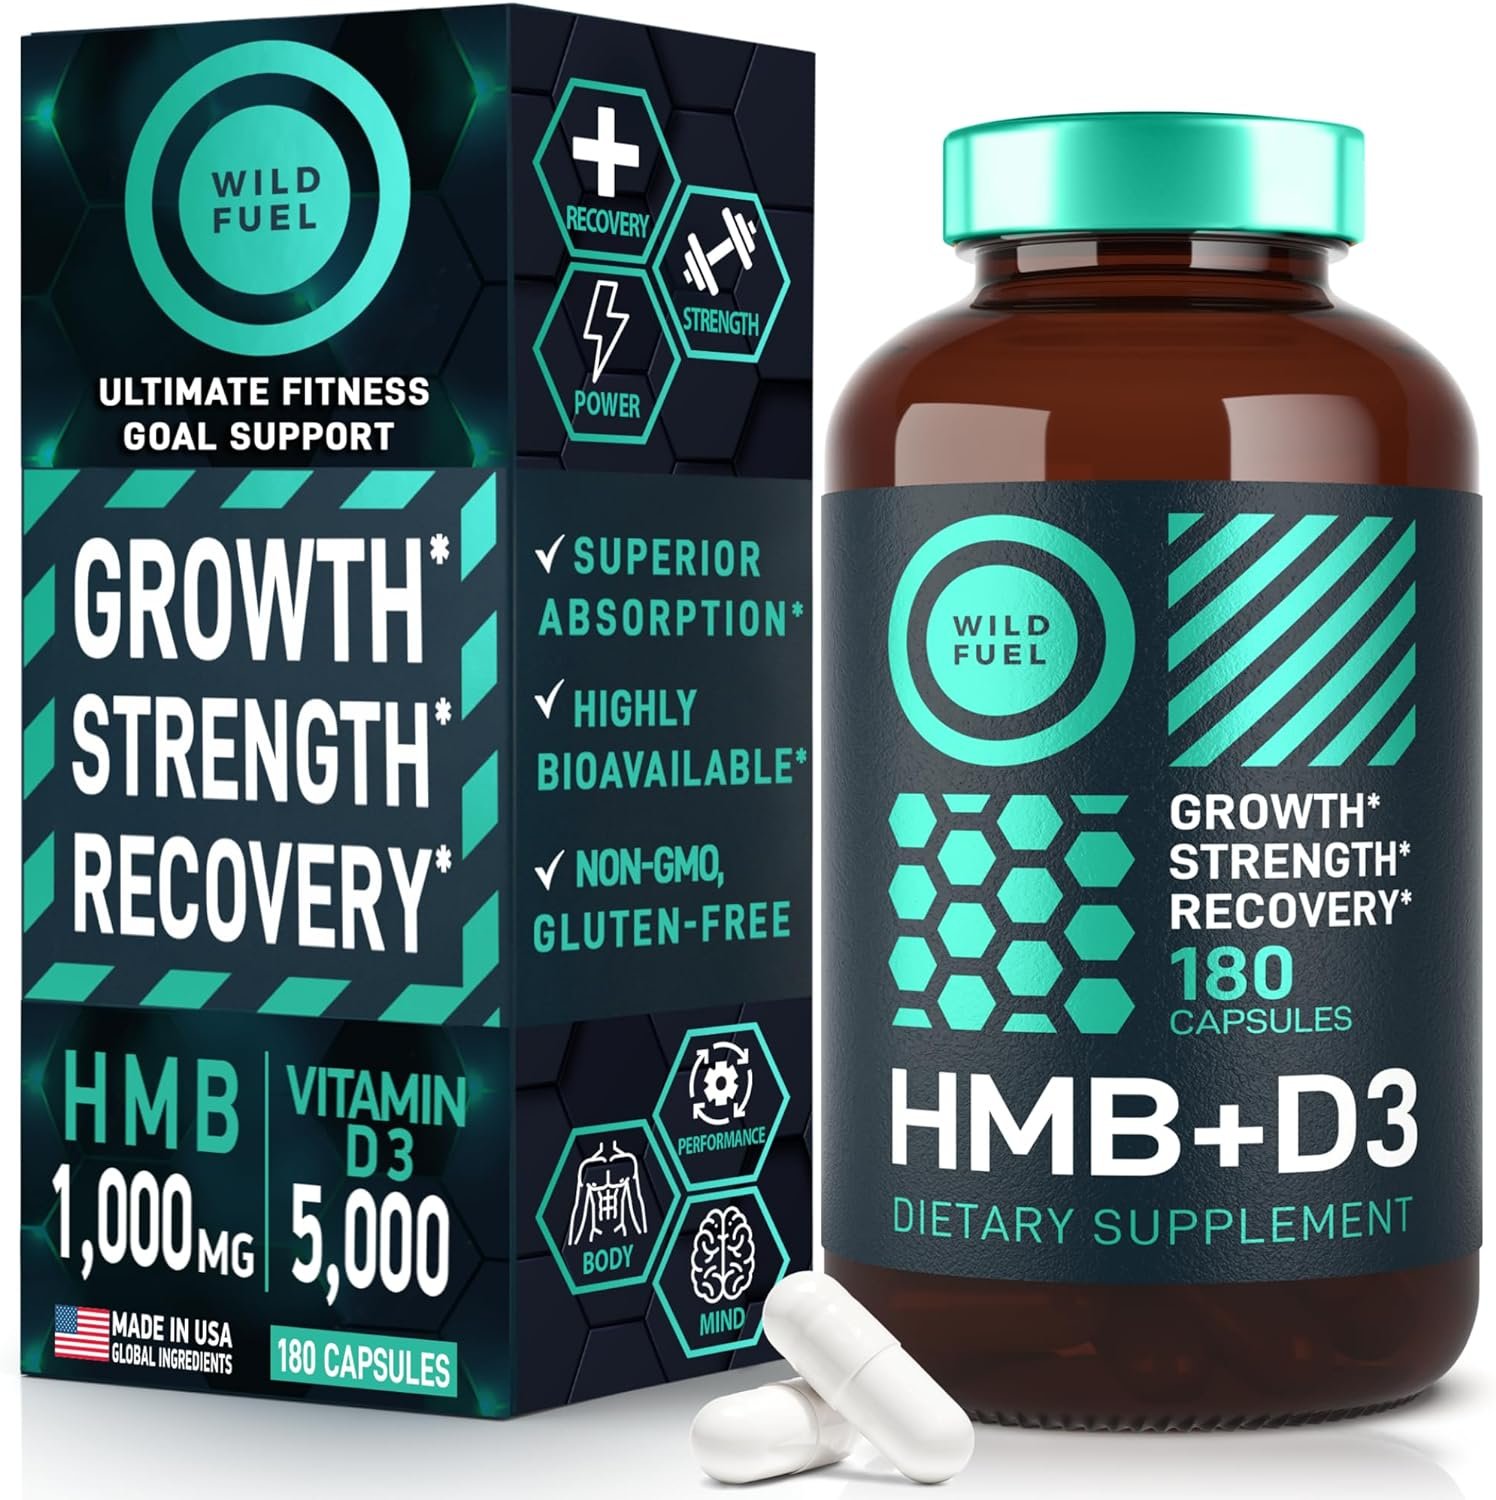 HMB and Vitamin D3 Supplement Capsules - Muscle Growth, Strength, Performance and Recovery Support - B-Hydroxy B-Methylbutyrate 1,000 MG HMB Supplements with Calcium, D3 250%DV - 90 Serve, 180 Caps